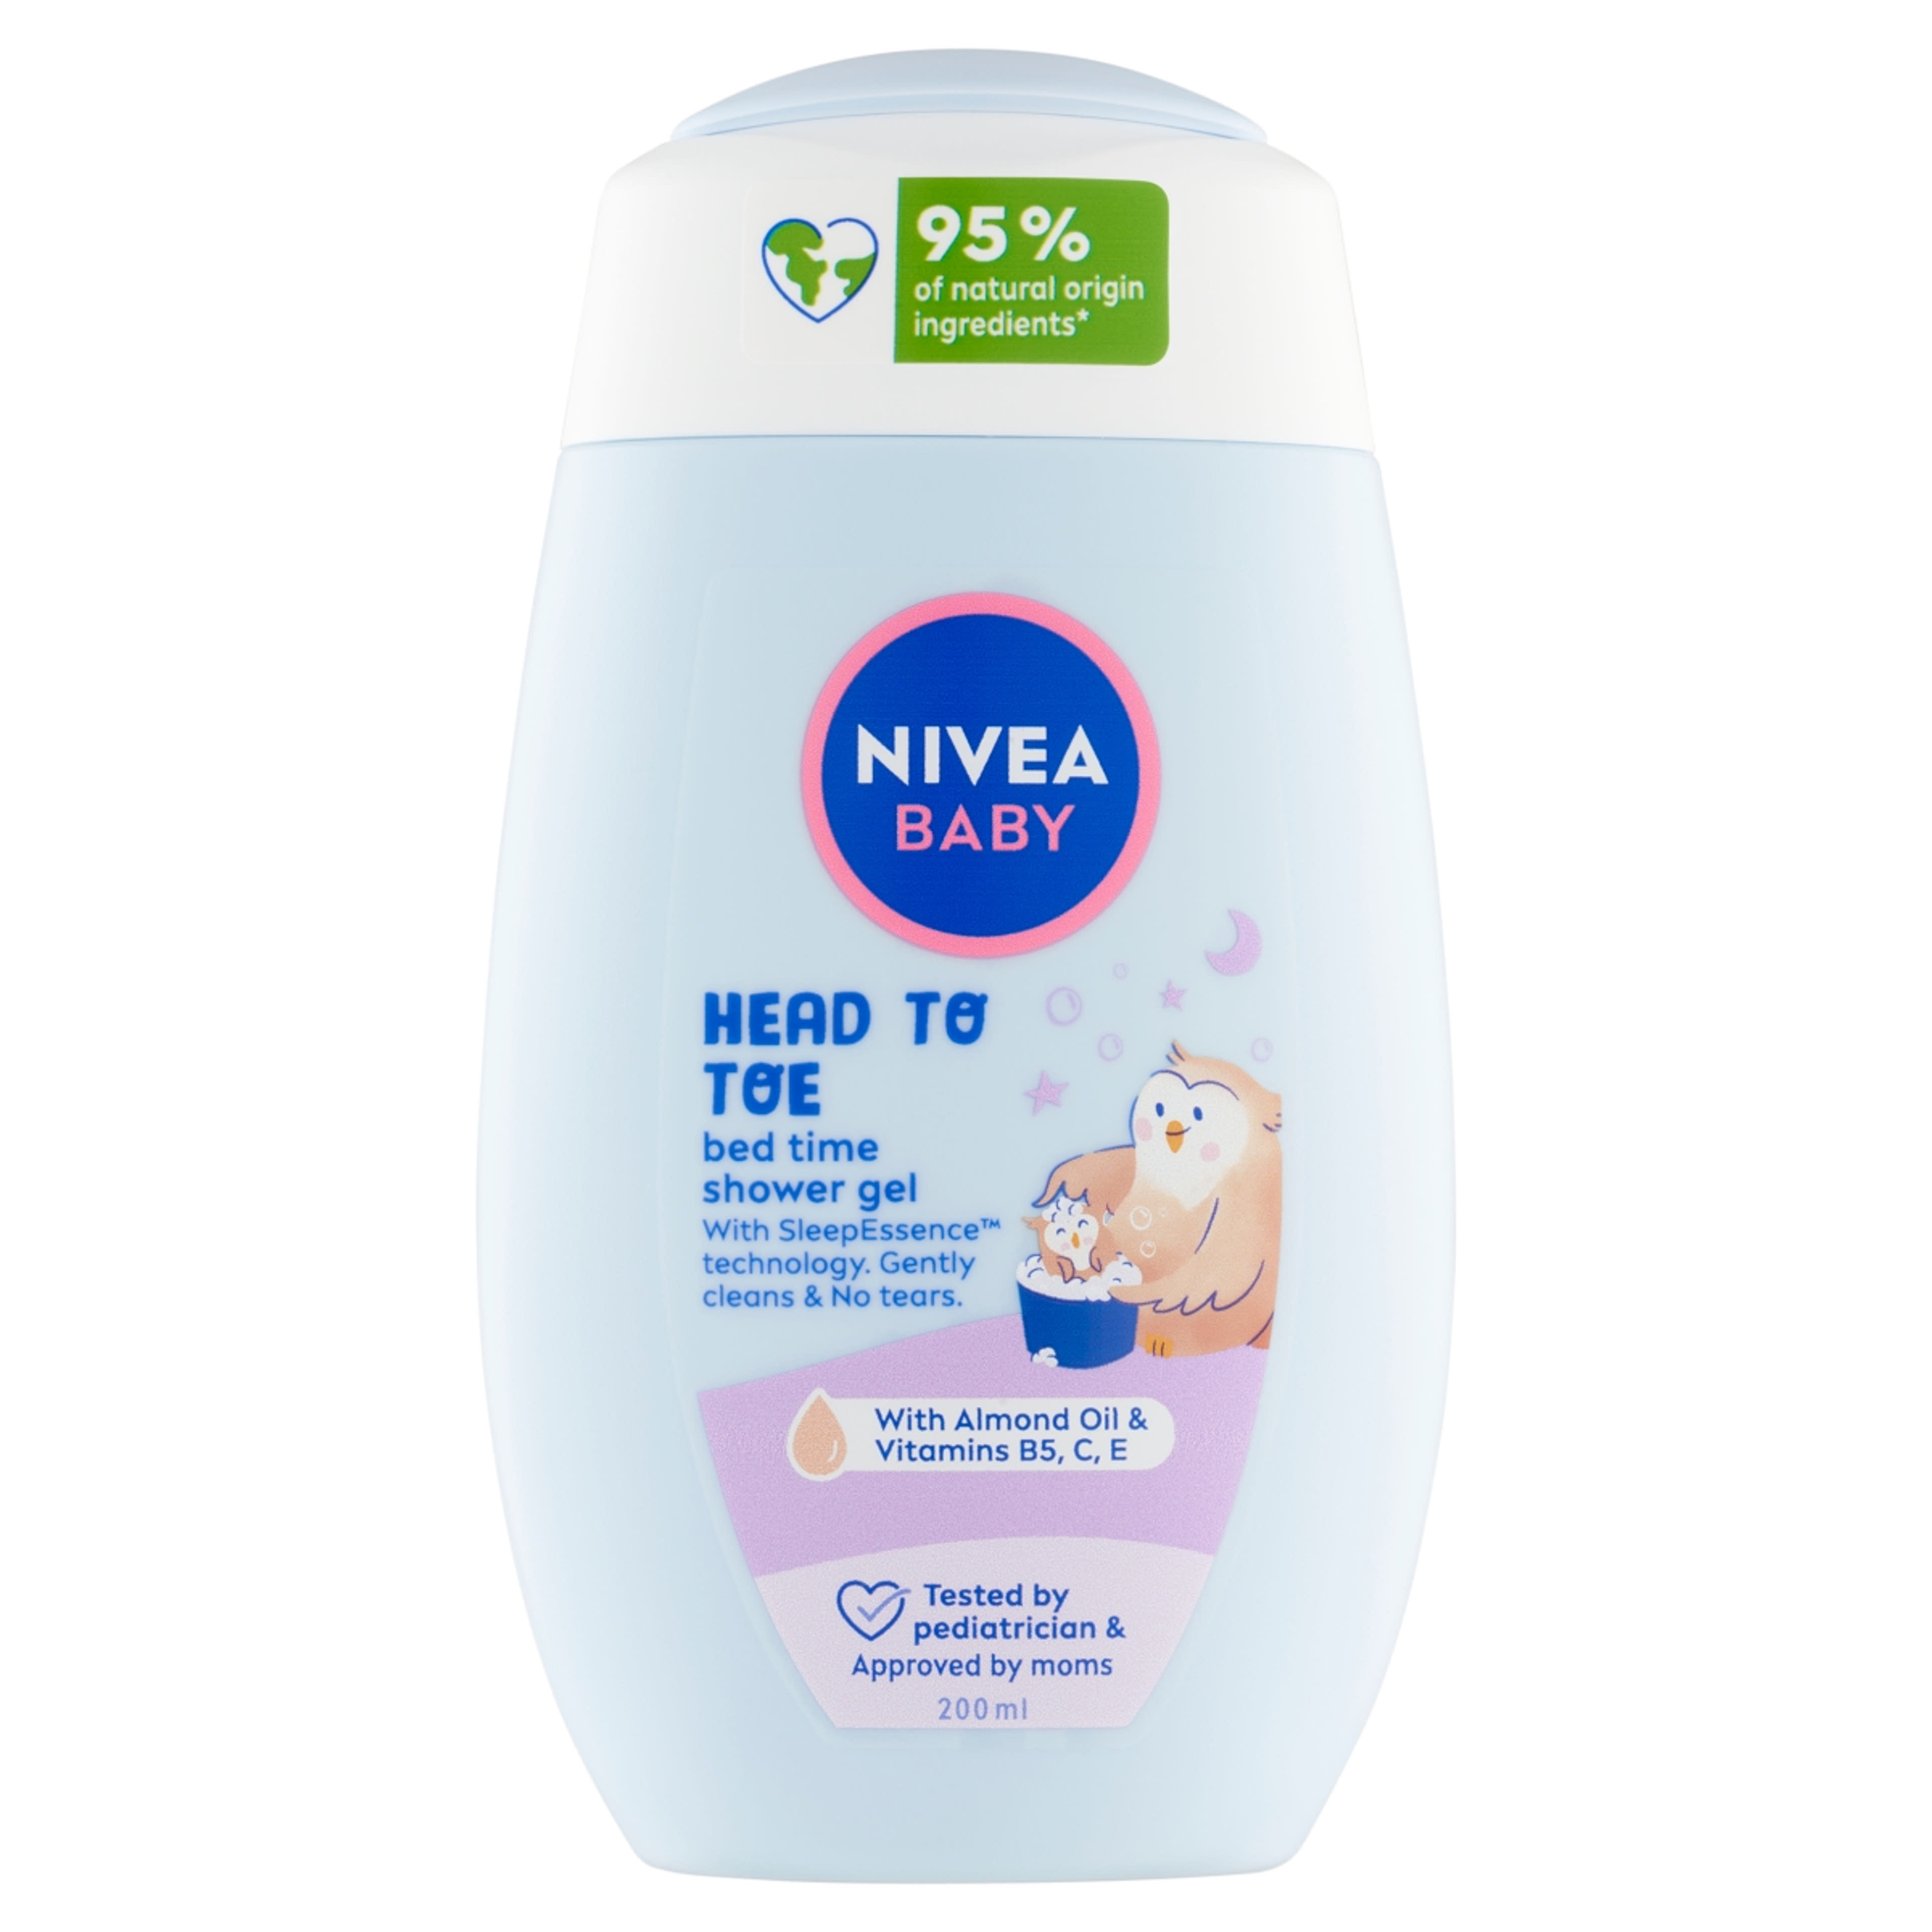 Nivea BABY Bed Time Head to Toe tusfürdő - 200 ml